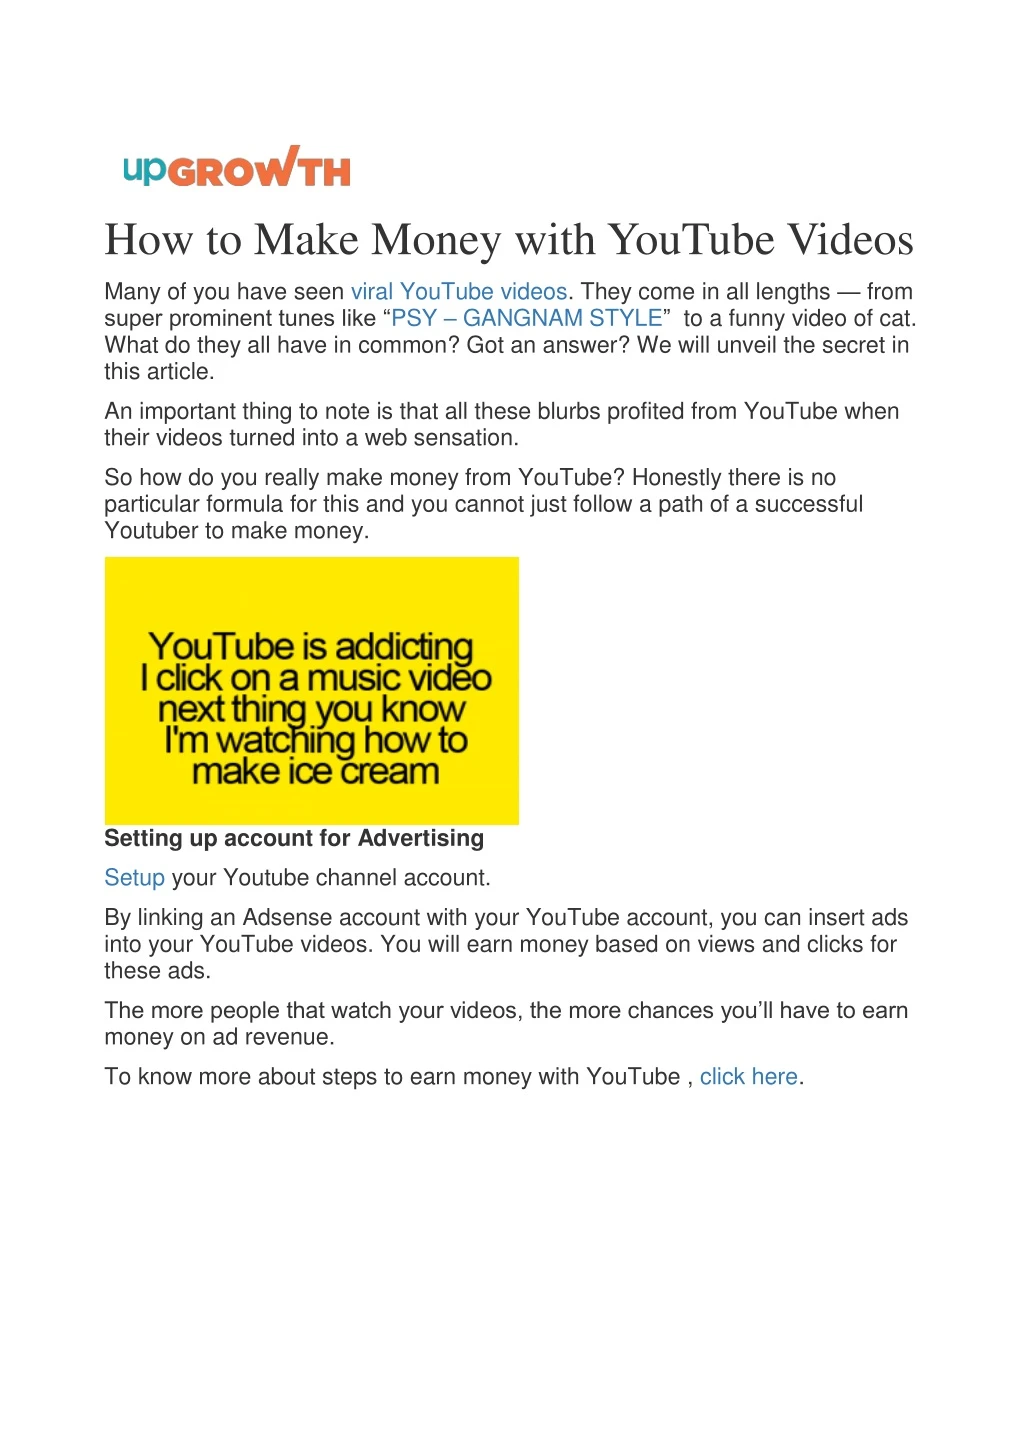 how to make money with youtube videos